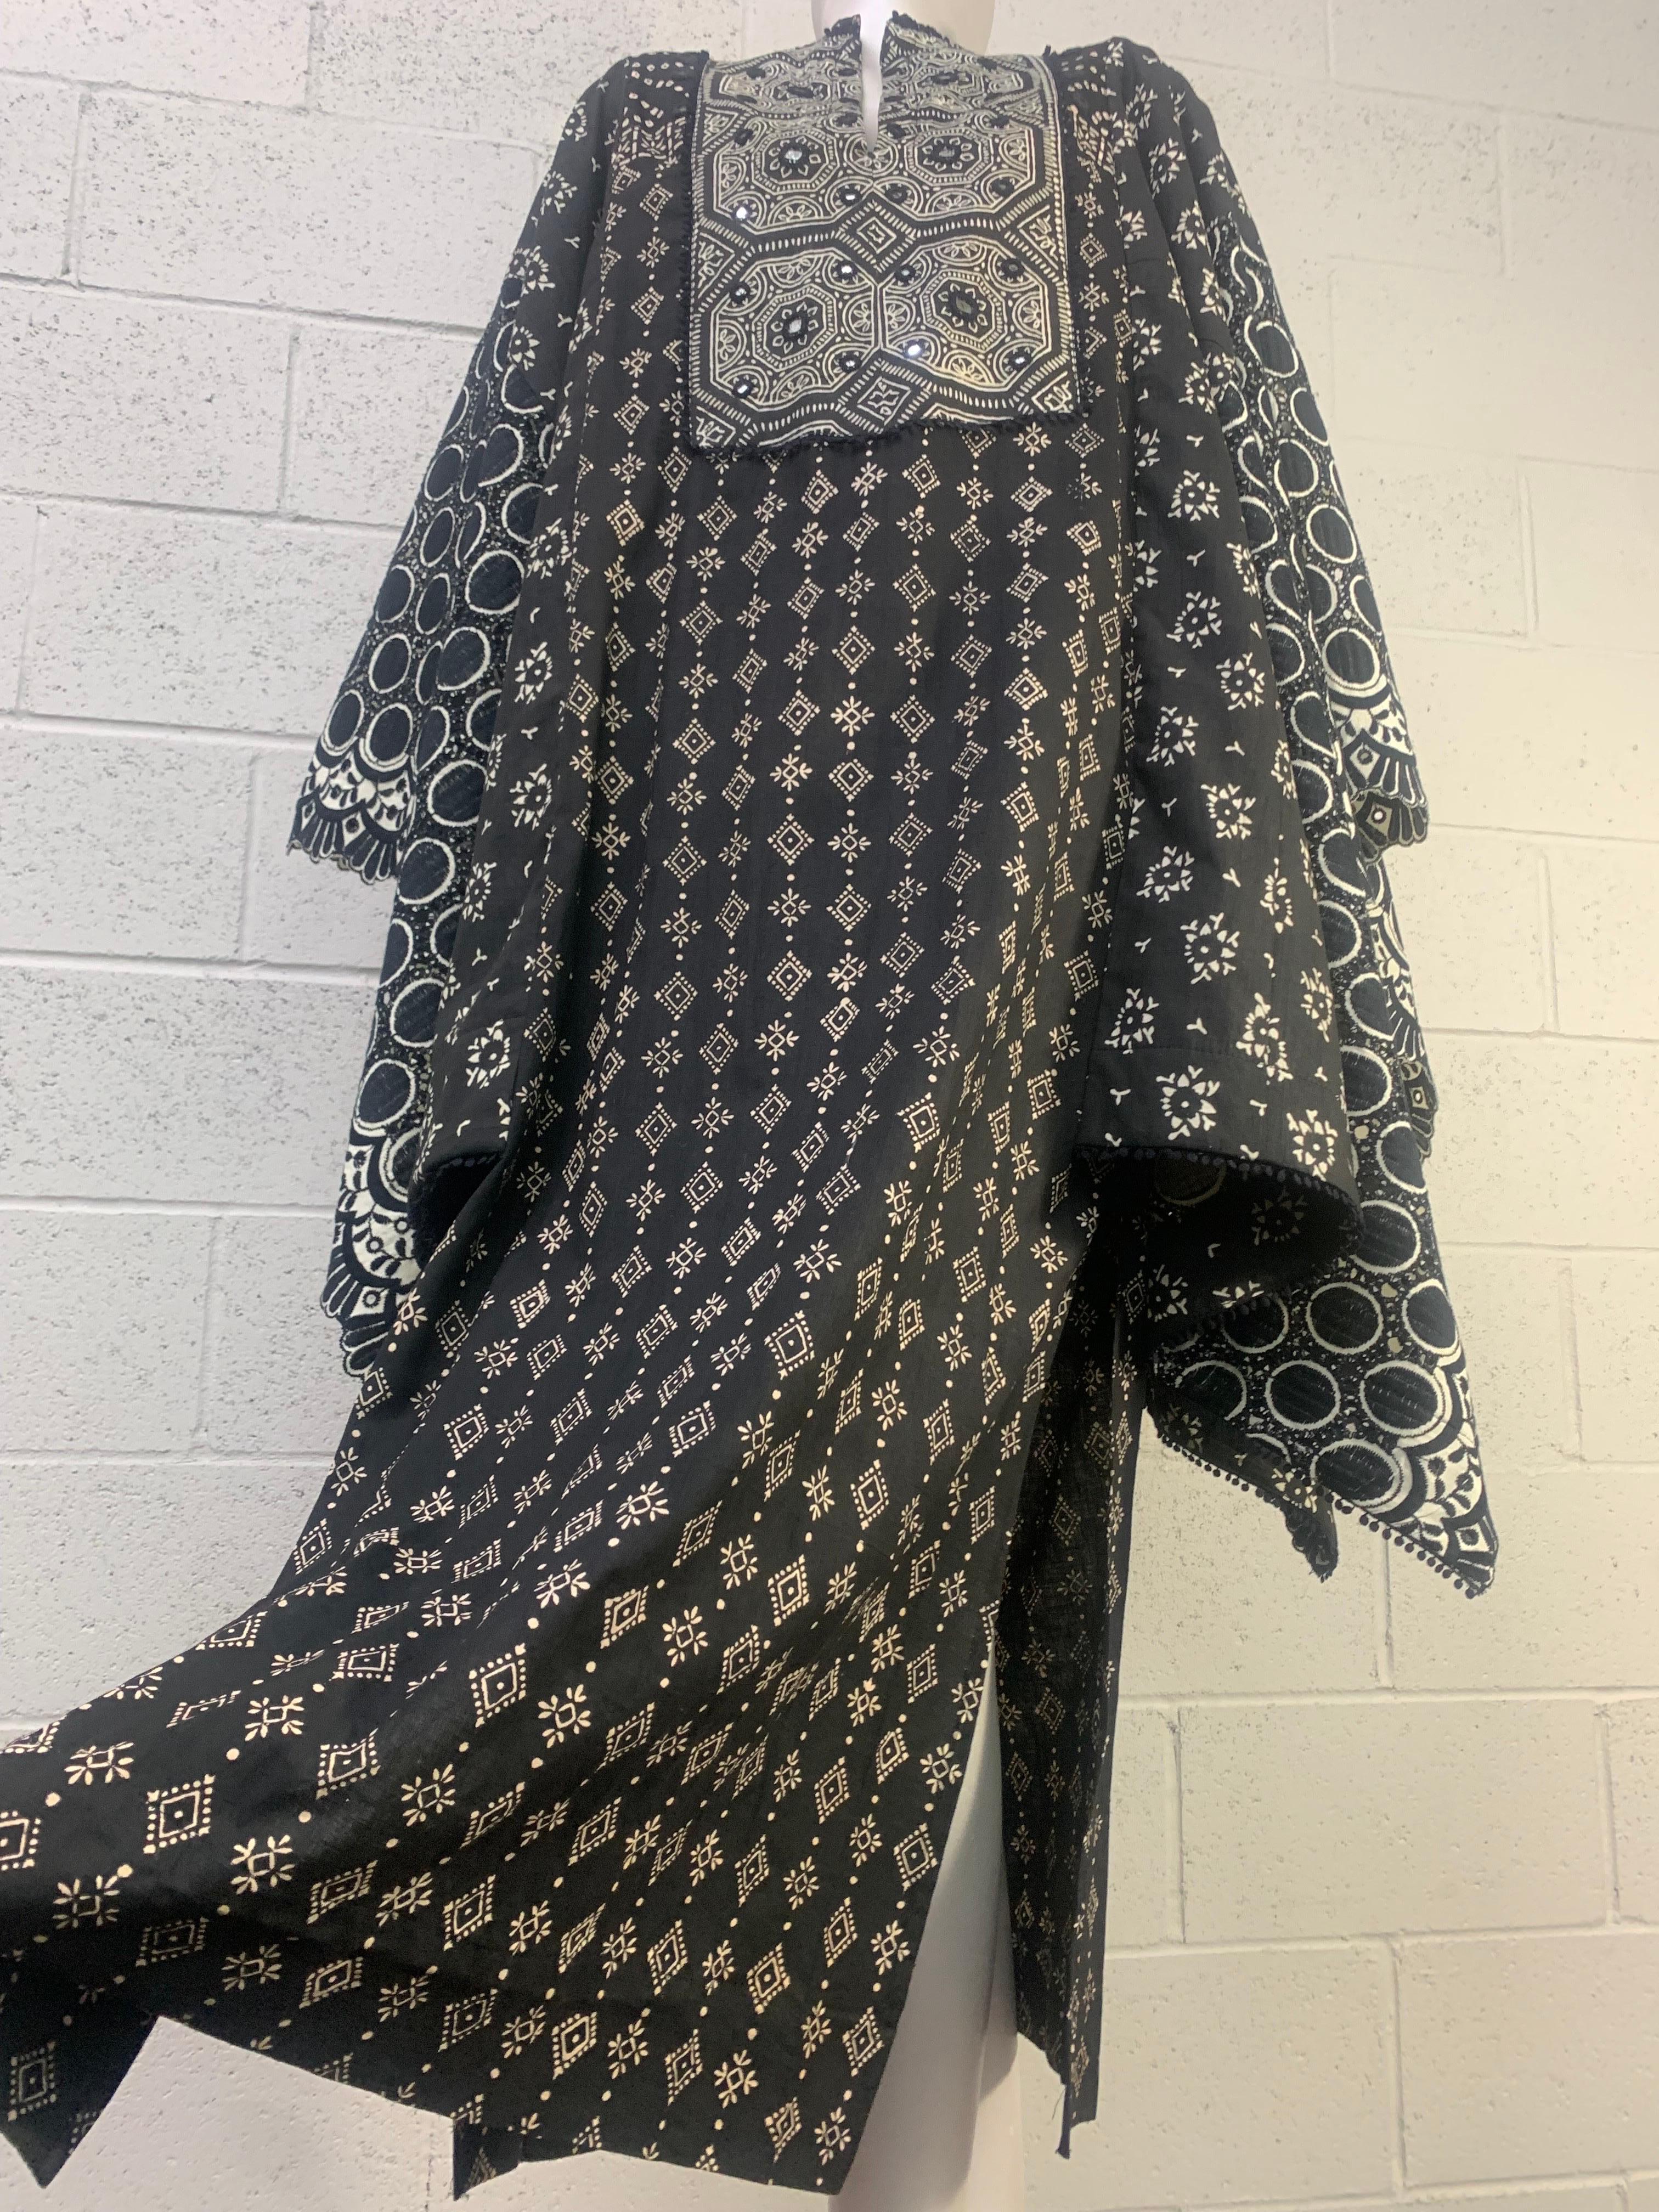 Torso Creations Black & White Block-Printed Caftan w Extravagant Draped Sleeves: Traditional block-printed cotton with center mirror front bib and handkerchief hem sleeves in complimentary patterned panels make a statement. Unlined. Back Zipper. US